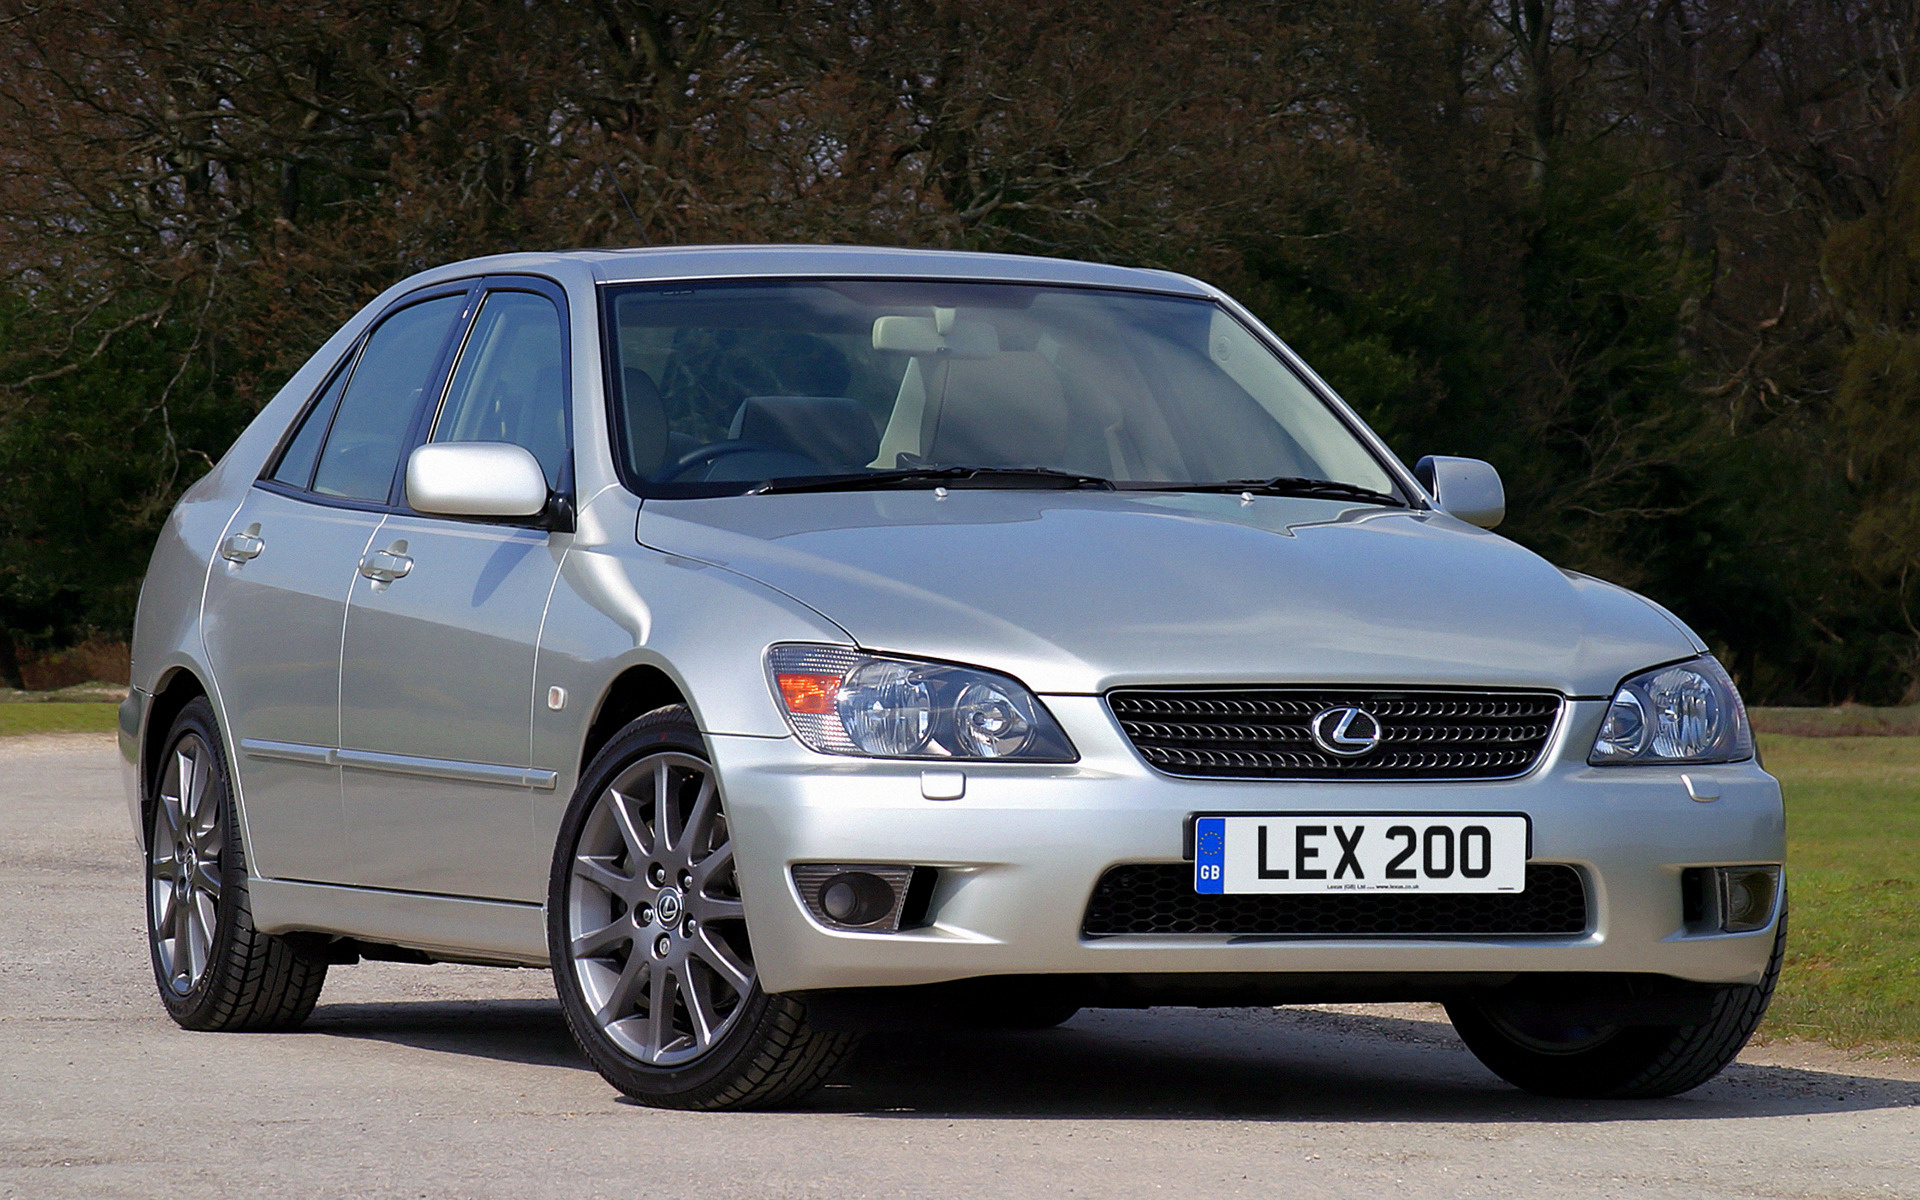 1999 Lexus IS (UK) - Wallpapers and HD Images | Car Pixel